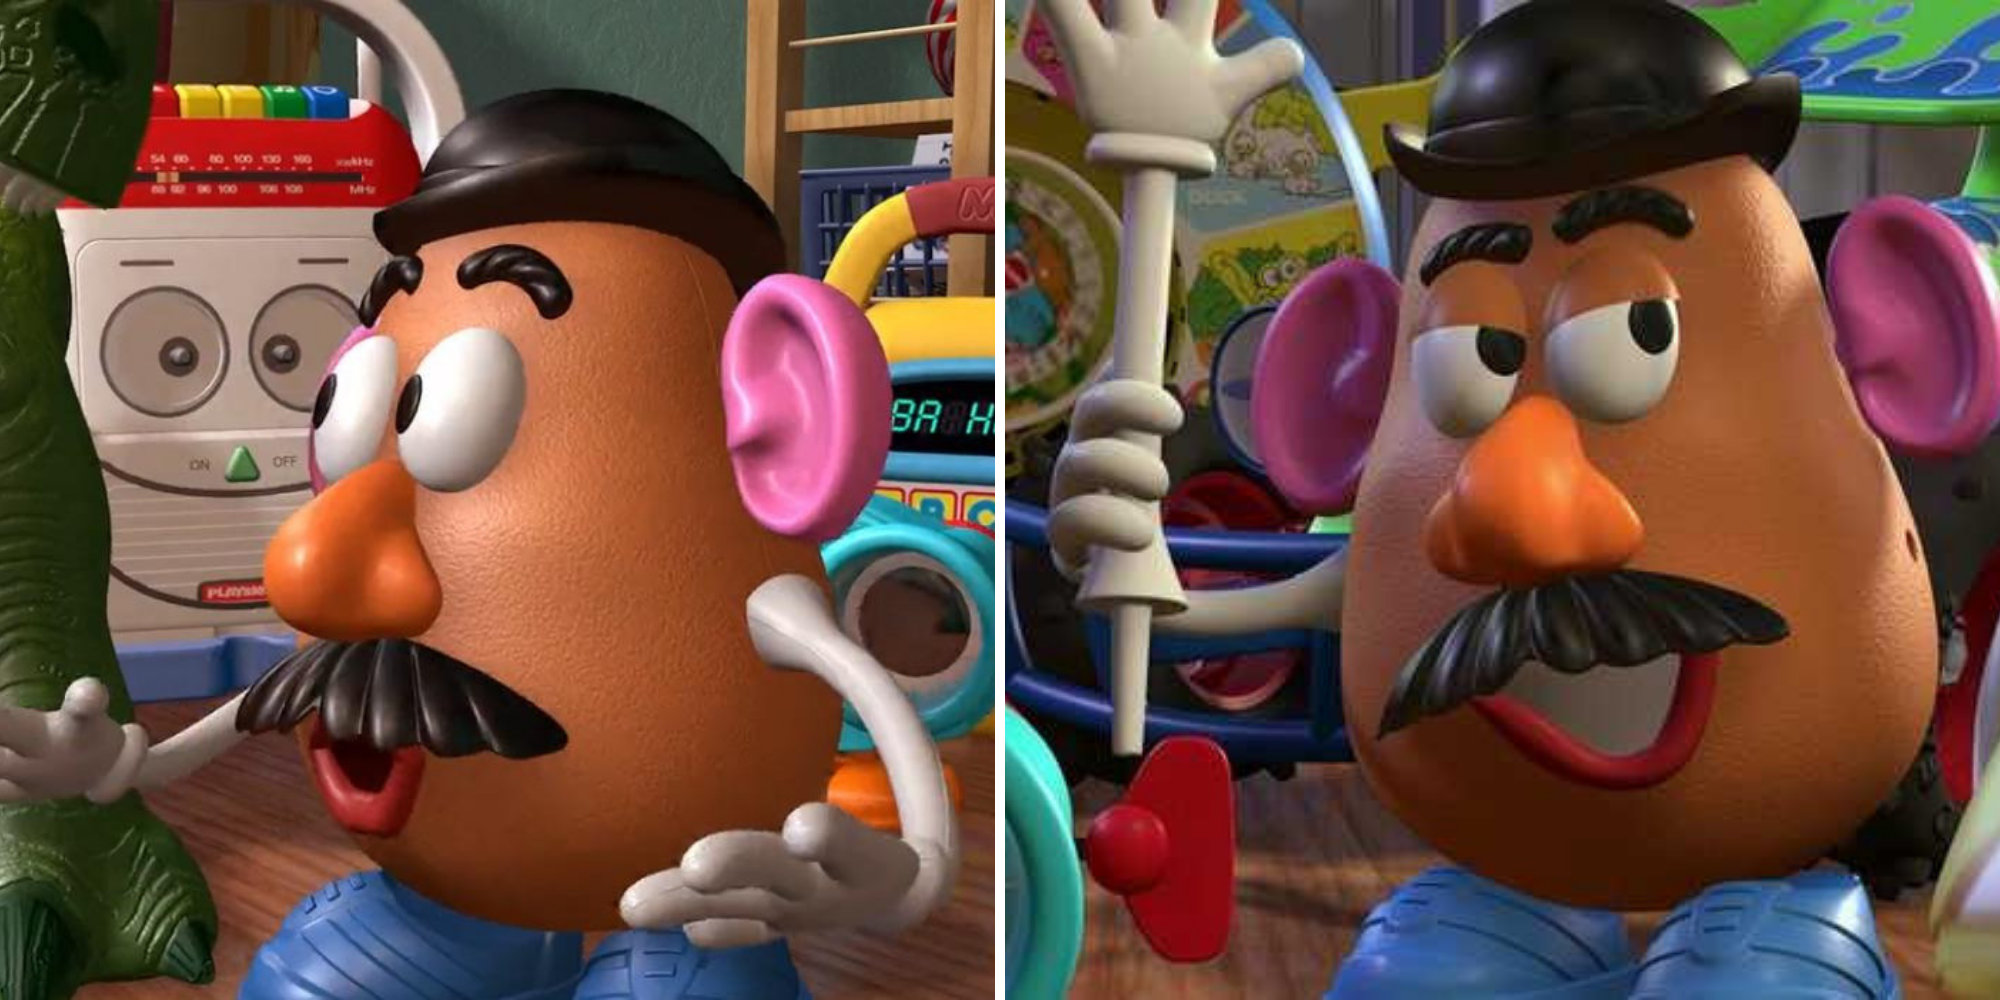 toy story 1 vs toy story 4 graphics